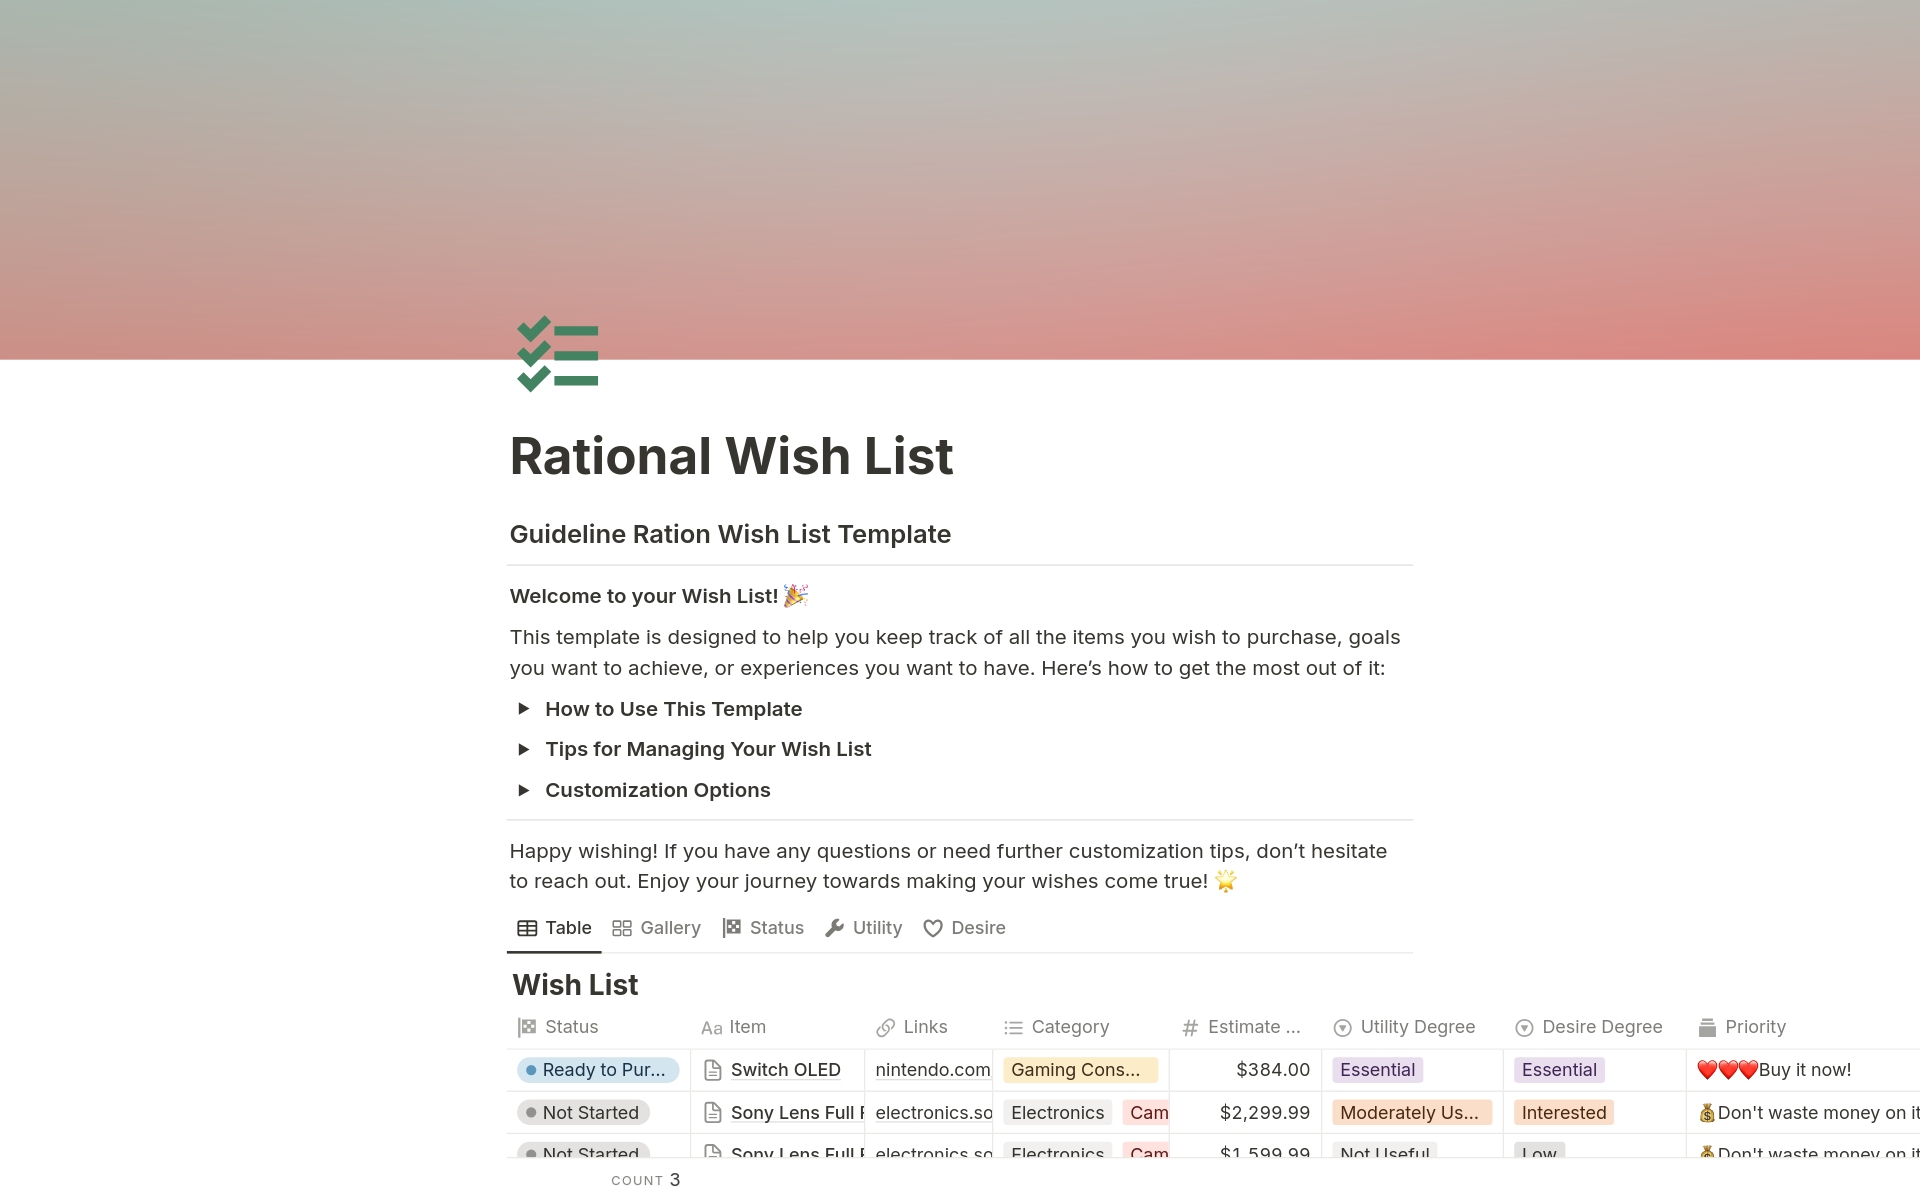 This template is designed to help you efficiently track all the items you wish to purchase, goals you want to achieve, and experiences you want to have. 